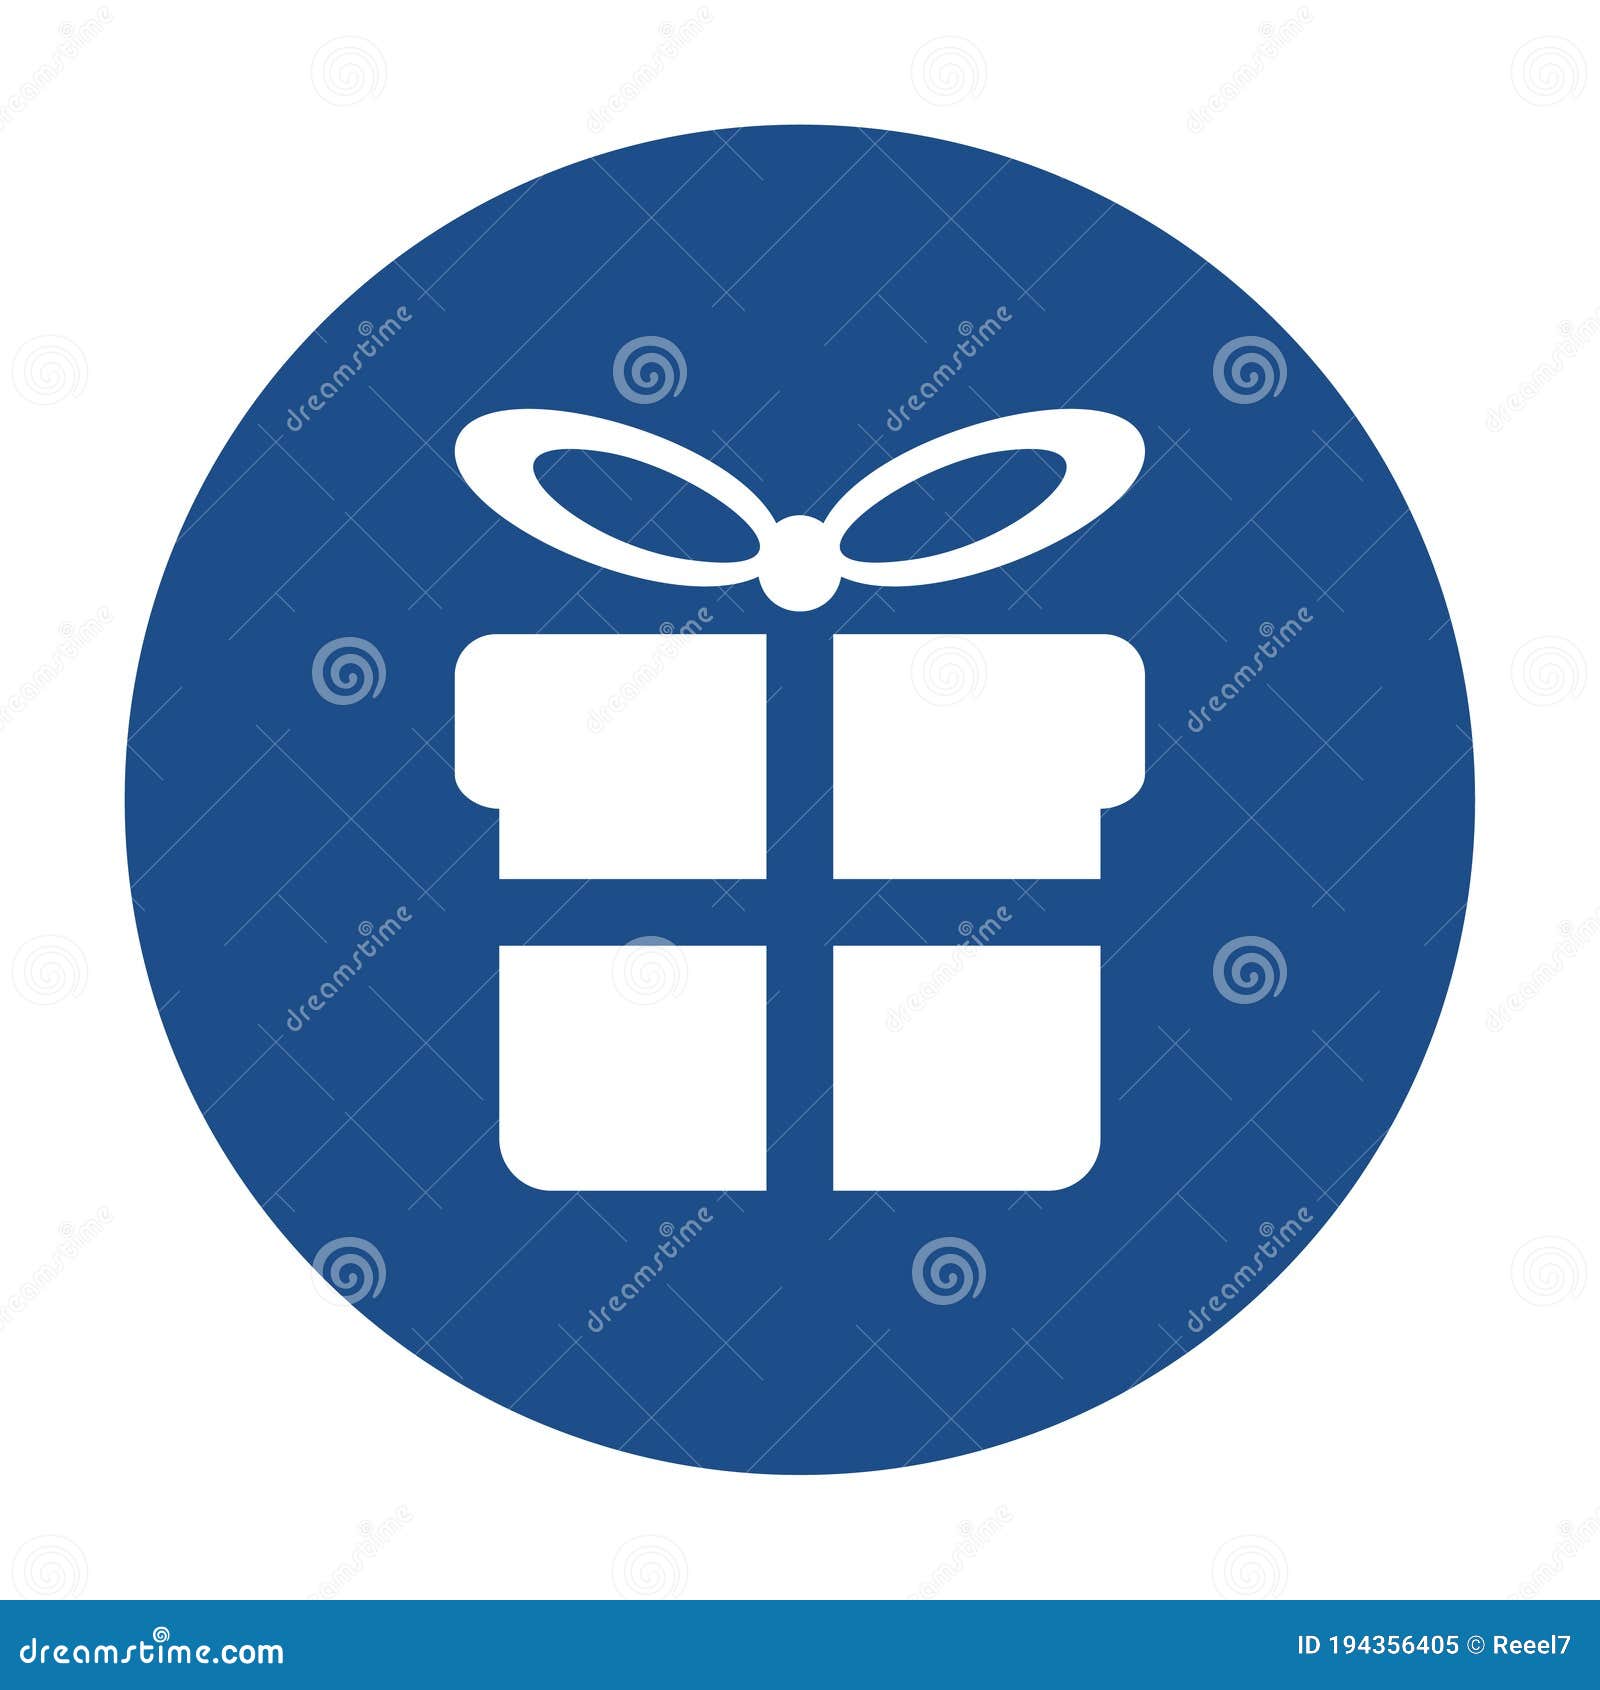 Blue Round Gift Box with Tied Bow Icon, Button Isolated on a White ...